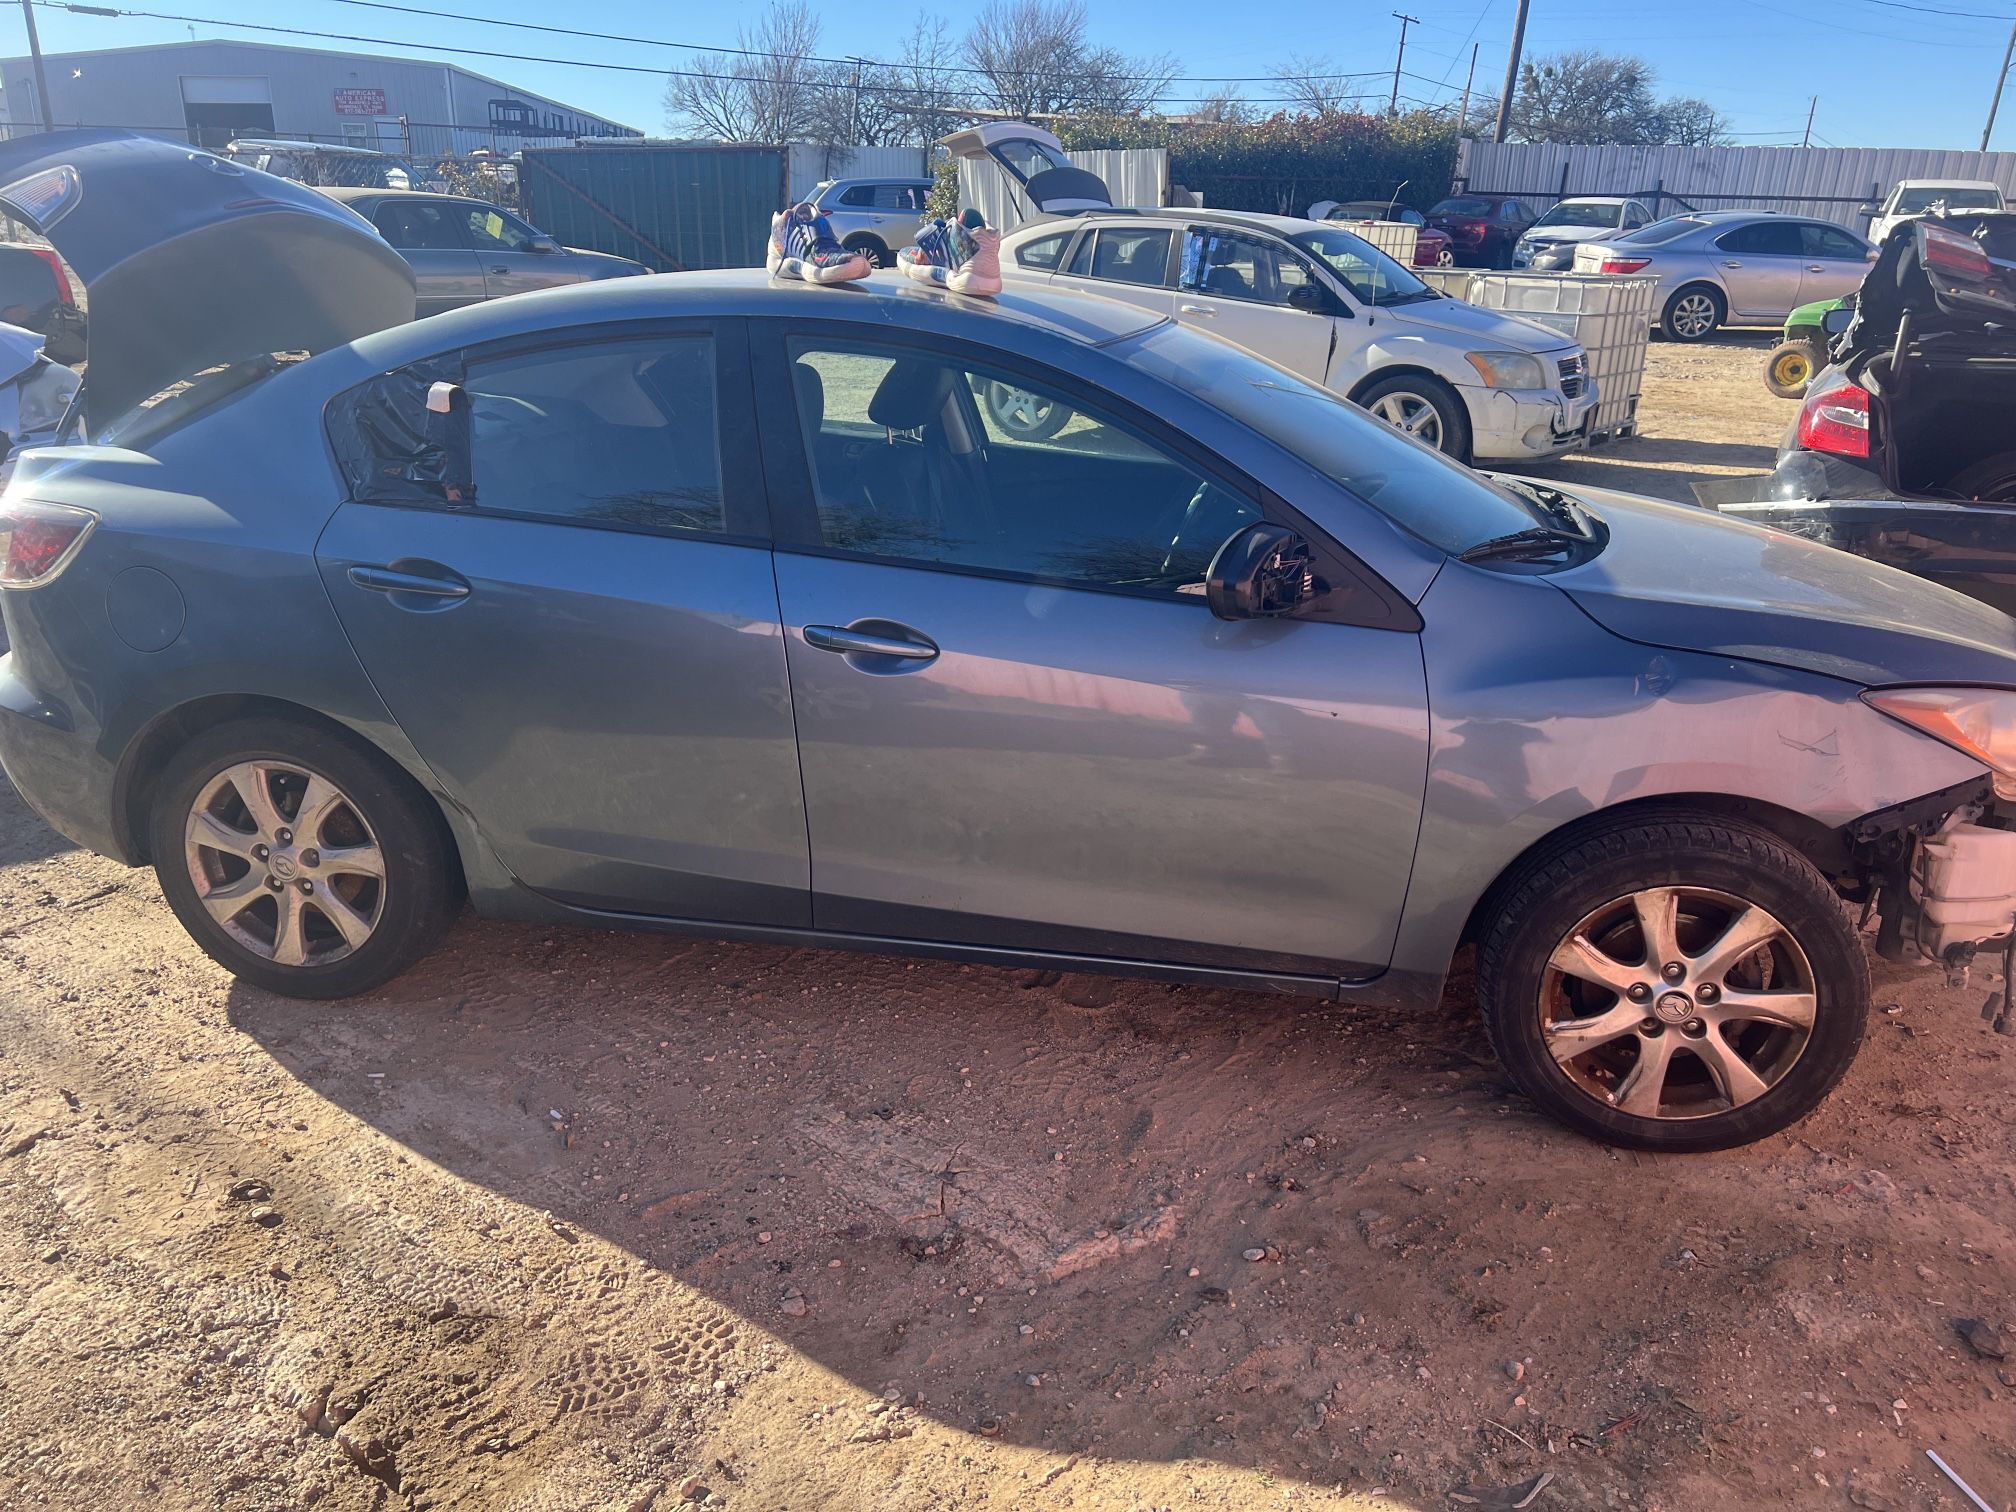 2010 Mazda 3 - Parts Only #AA3